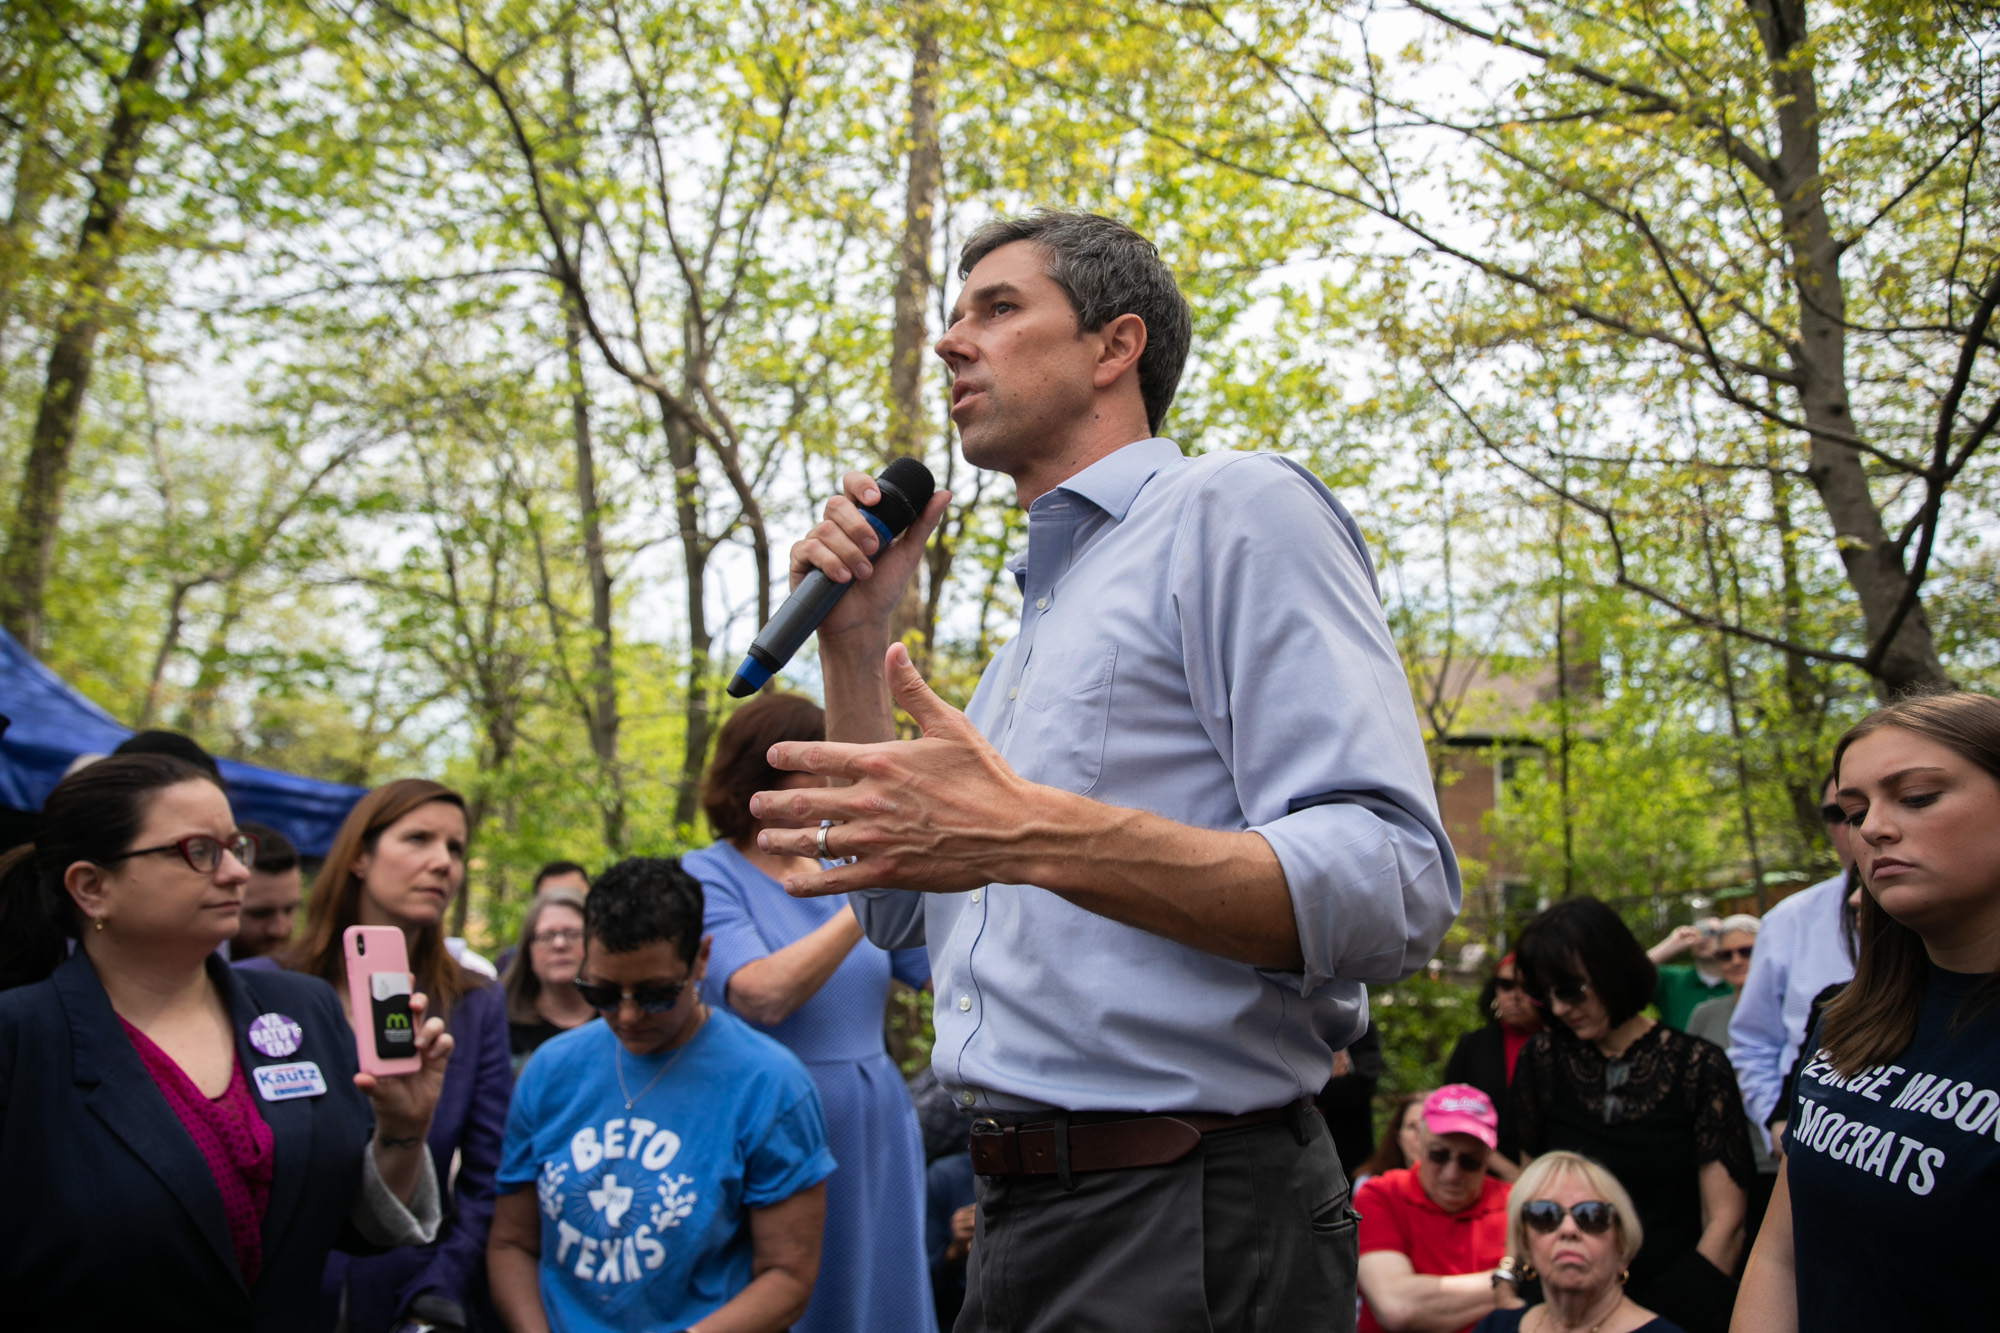 Democratic 2020 presidential candidate Beta O'Rourke speaks at a meet and greet at Tammy Derenak Kaufax's house in Alexandria, Virginia, Wednesday, April 17, 2019.